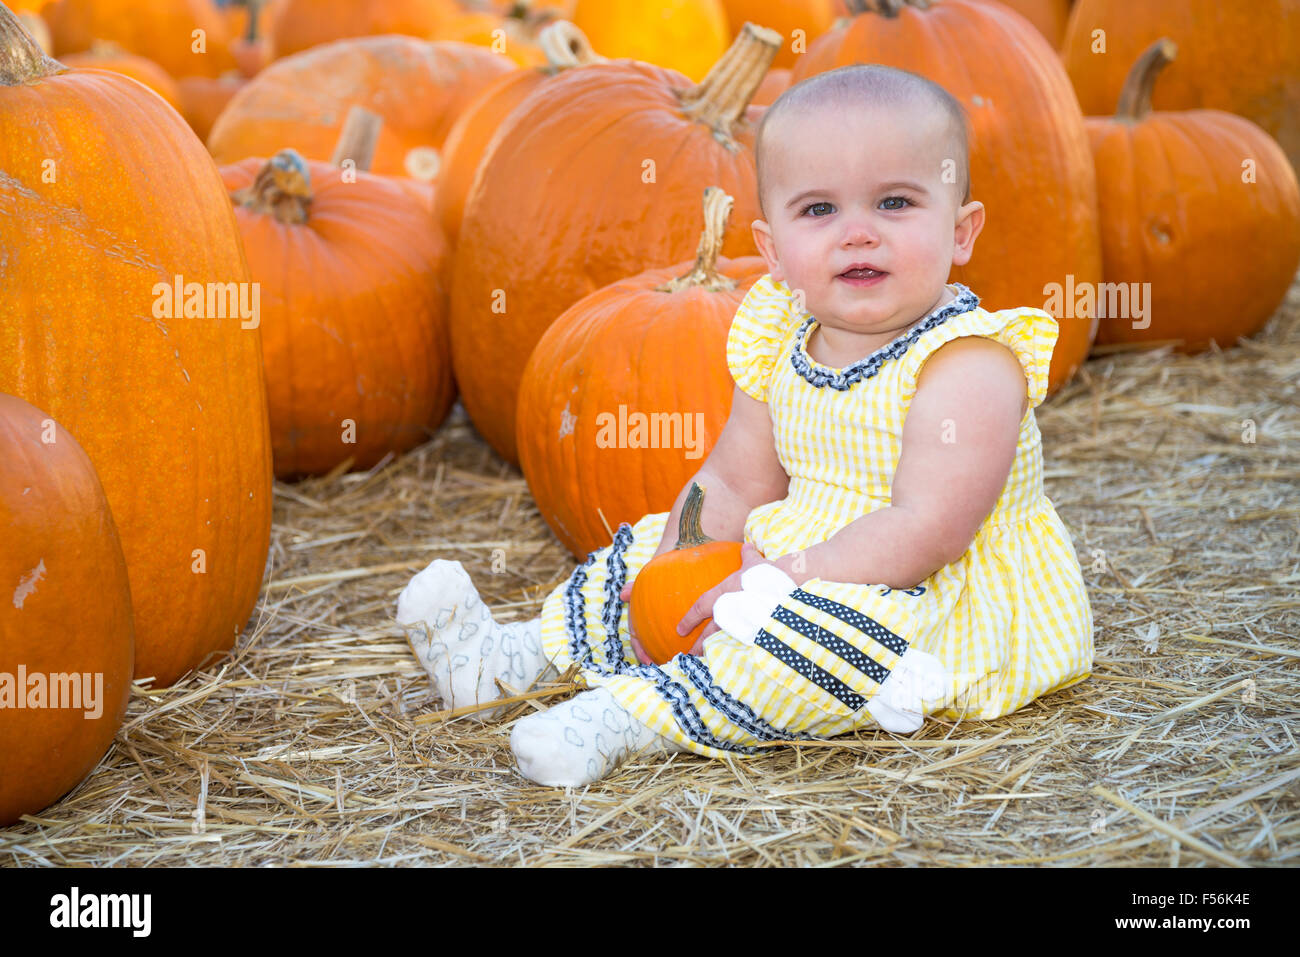 Cute Baby sitting in a Pumpkin Patch Stock Photo